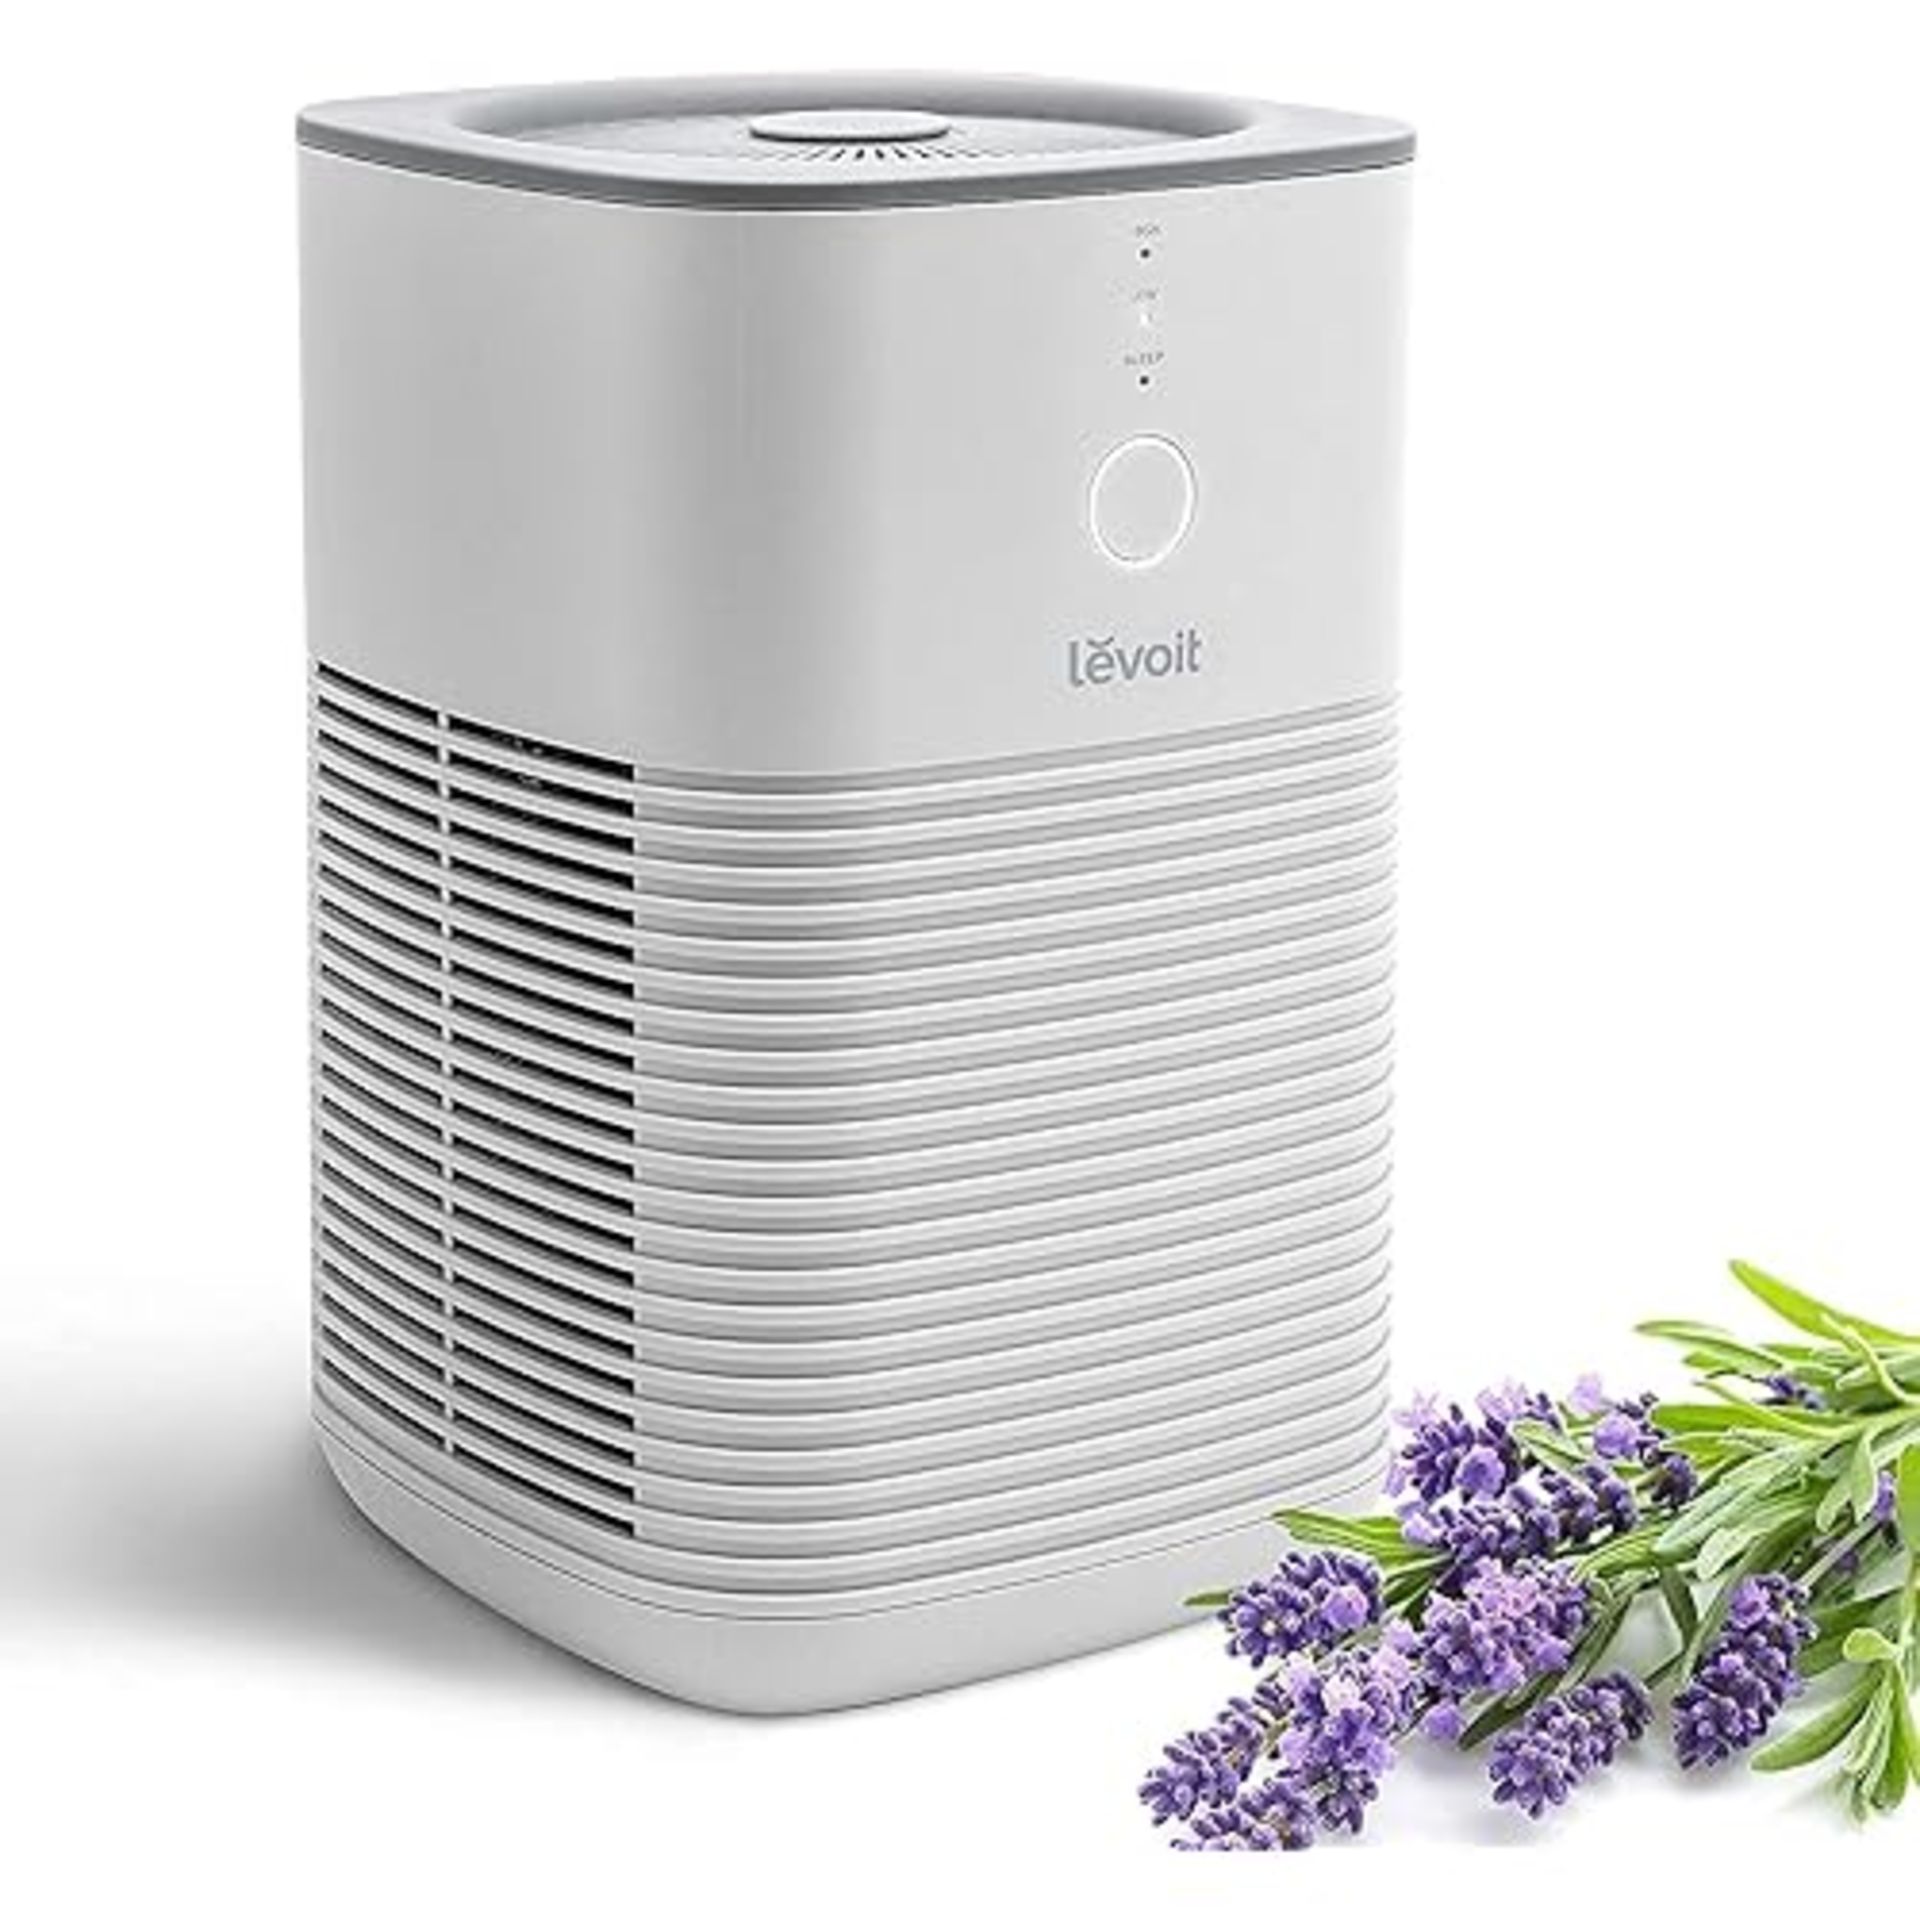 LEVOIT Air Purifier for Home Bedroom, Dual HEPA Filters with Aromatherapy Diffuser, Quiet Sleep Mod